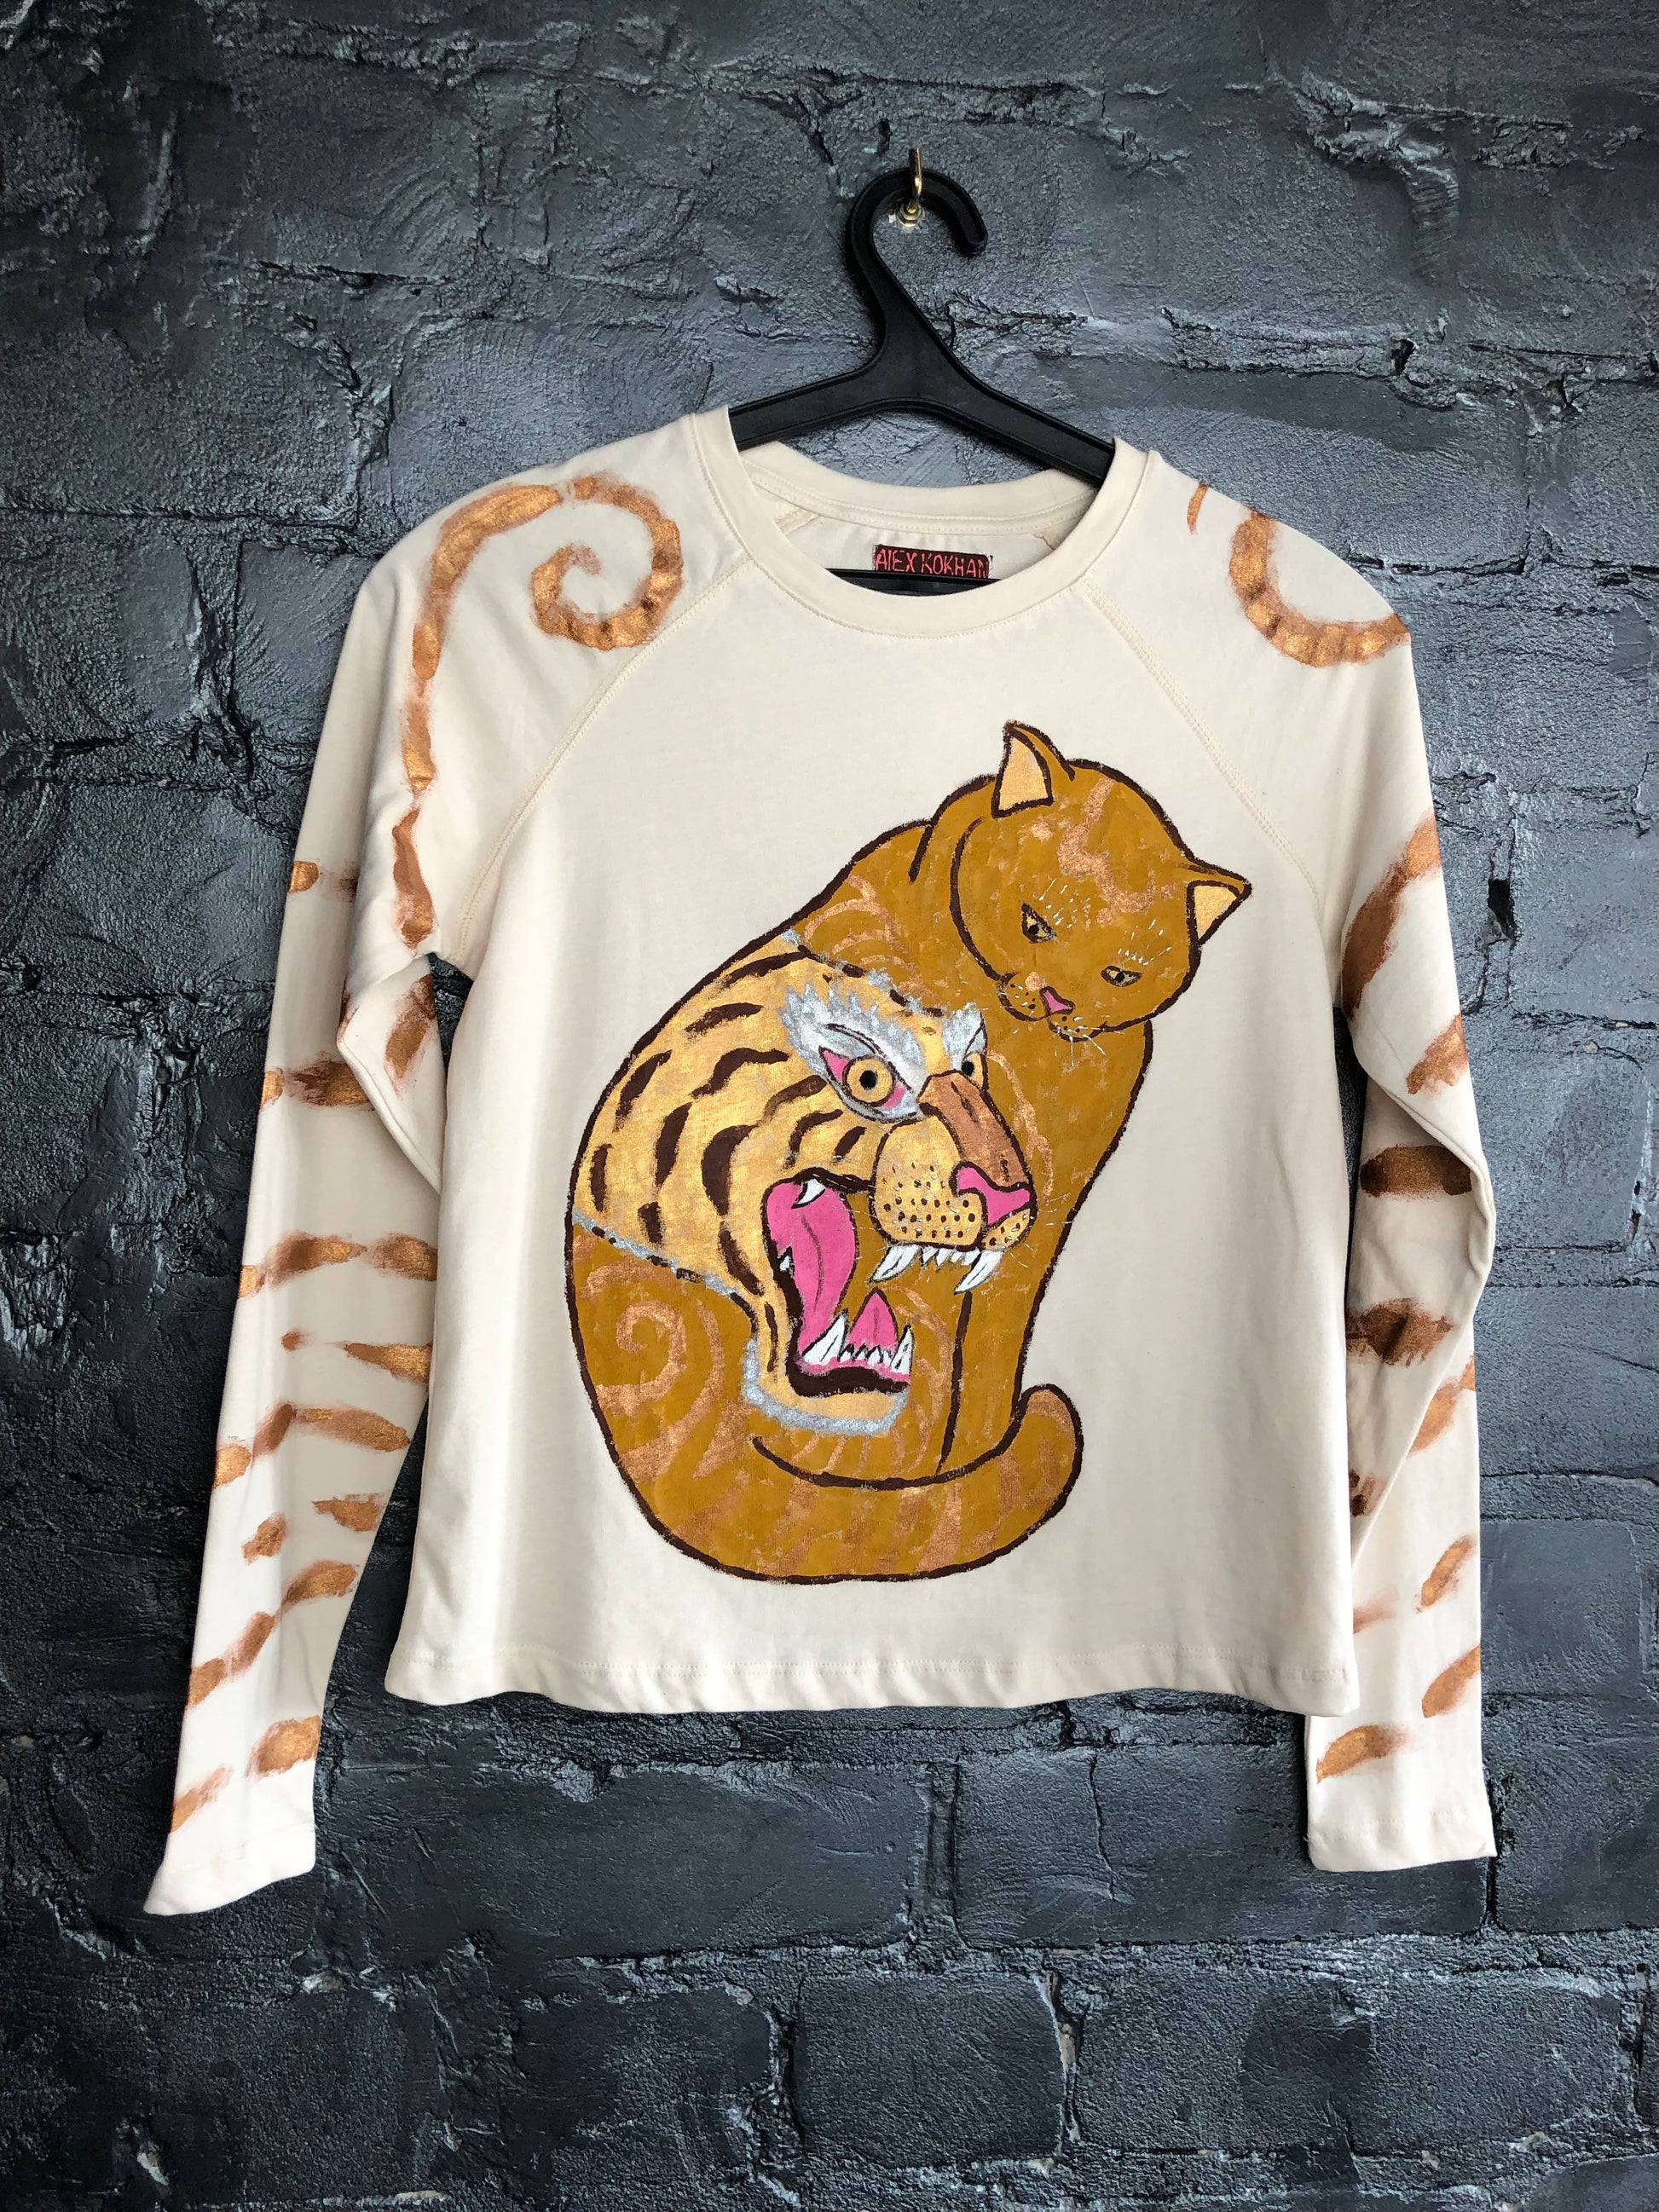 Women's long sleeve t-shirt cat, stripes angry tiger